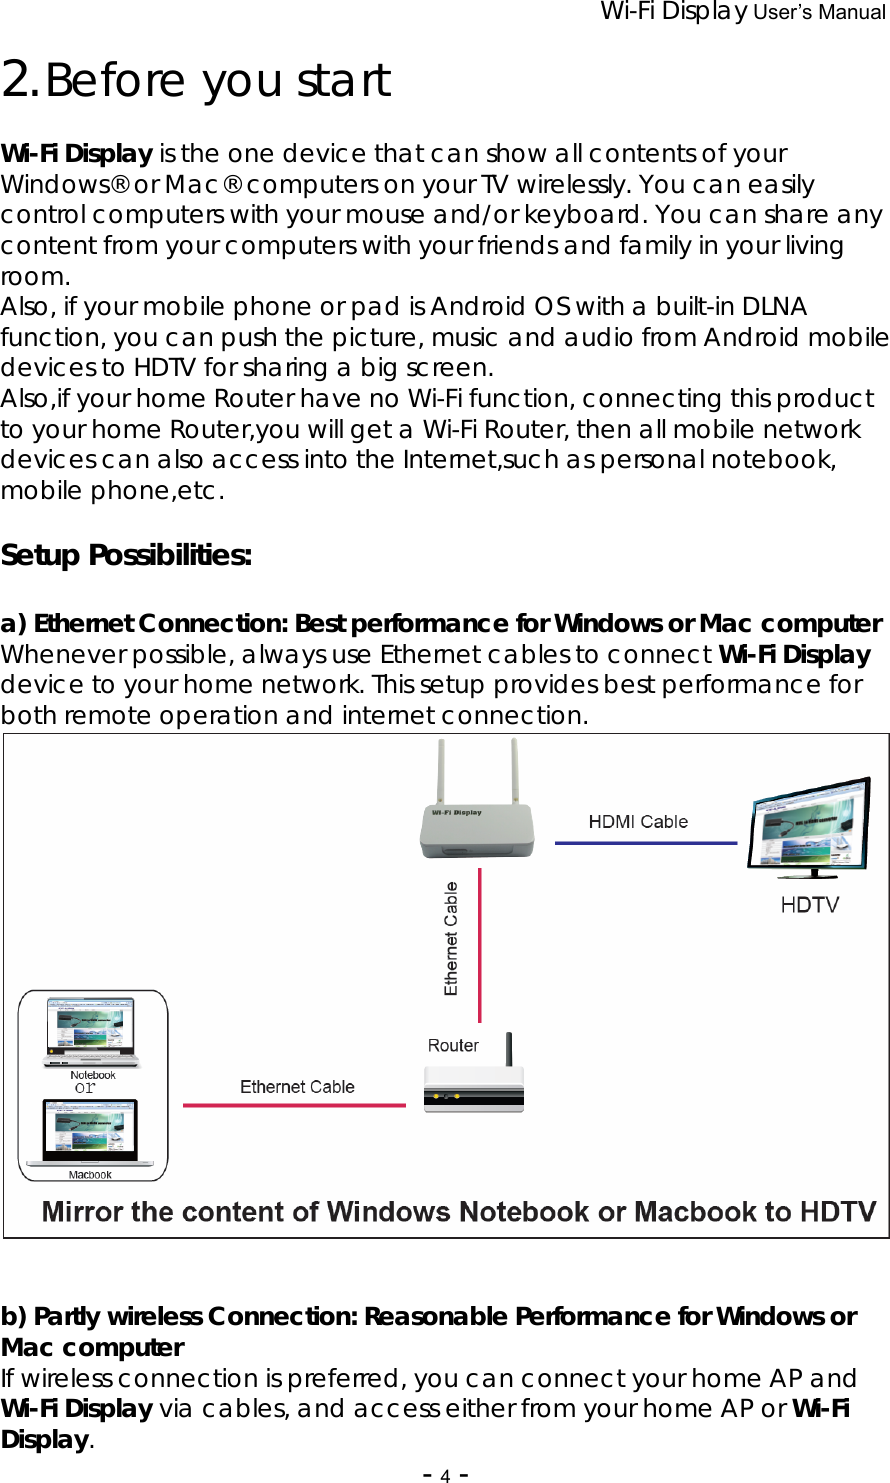 Wi-Fi Display User’s Manual - 4 - 2. Before you start  Wi-Fi Display is the one device that can show all contents of your Windows® or Mac® computers on your TV wirelessly. You can easily control computers with your mouse and/or keyboard. You can share any content from your computers with your friends and family in your living room.  Also, if your mobile phone or pad is Android OS with a built-in DLNA function, you can push the picture, music and audio from Android mobile devices to HDTV for sharing a big screen. Also,if your home Router have no Wi-Fi function, connecting this product to your home Router,you will get a Wi-Fi Router, then all mobile network devices can also access into the Internet,such as personal notebook, mobile phone,etc.  Setup Possibilities:  a) Ethernet Connection: Best performance for Windows or Mac computer Whenever possible, always use Ethernet cables to connect Wi-Fi Display device to your home network. This setup provides best performance for both remote operation and internet connection.    b) Partly wireless Connection: Reasonable Performance for Windows or Mac computer If wireless connection is preferred, you can connect your home AP and Wi-Fi Display via cables, and access either from your home AP or Wi-Fi Display. 